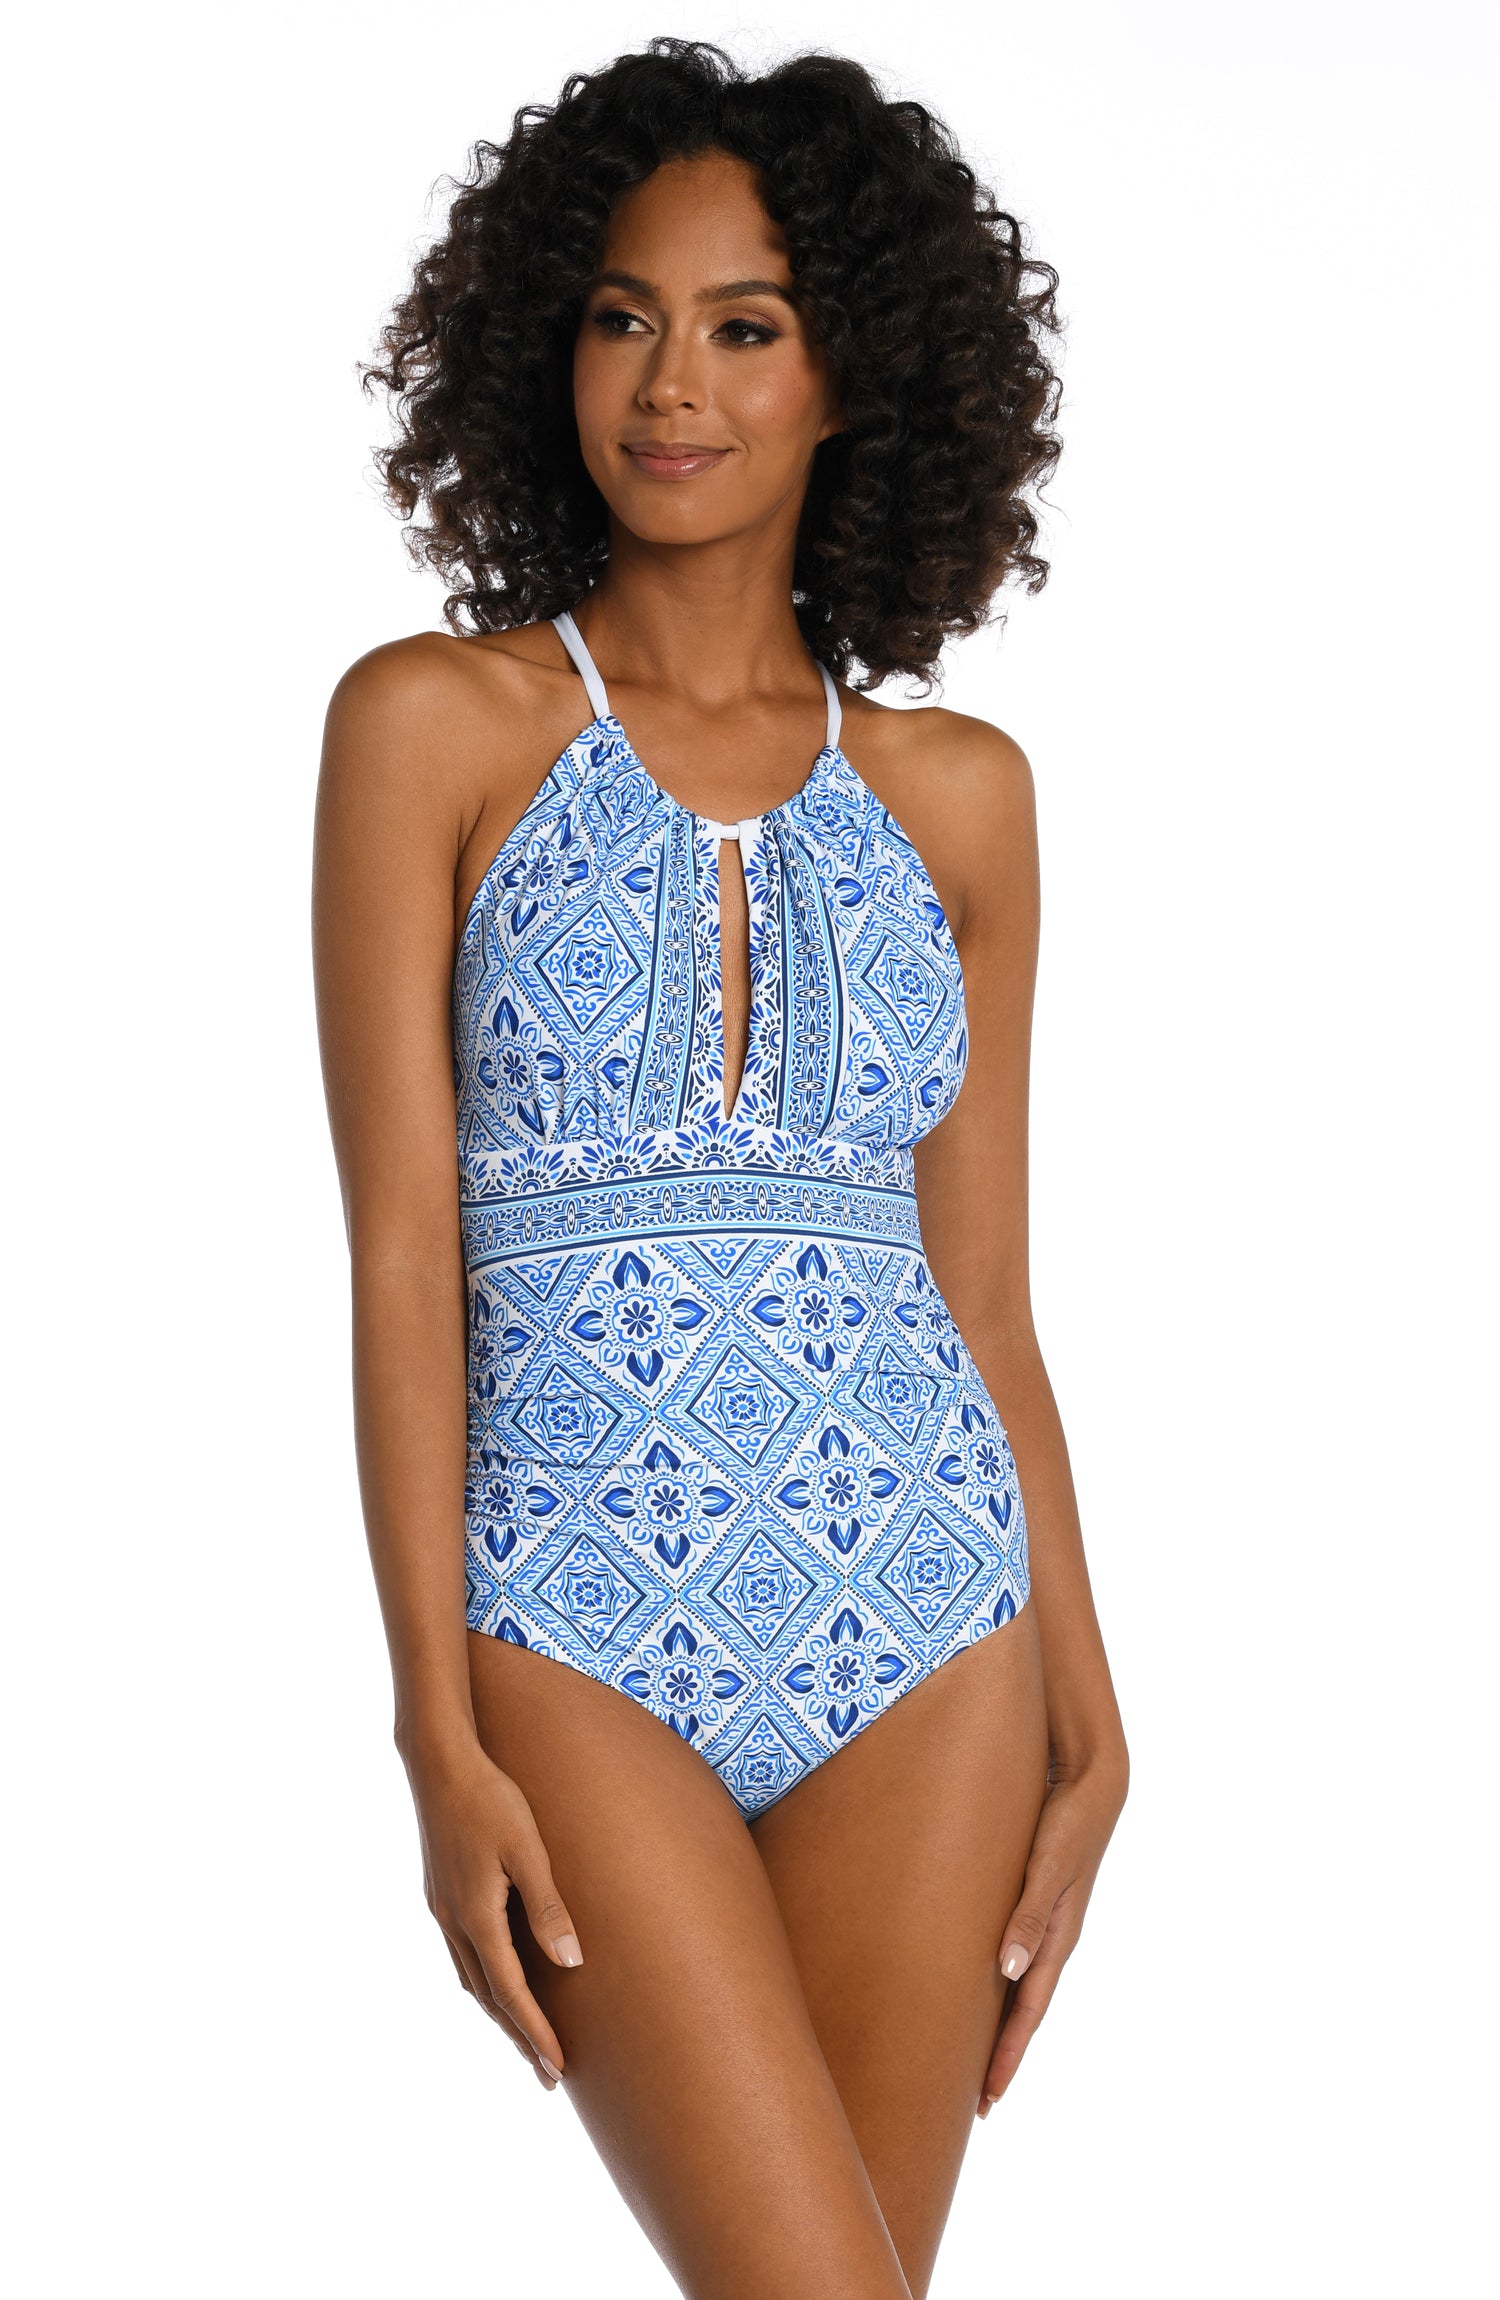 Model is wearing a light blue artful mosaic printed one piece swimsuit from our Mediterranean Breeze collection.